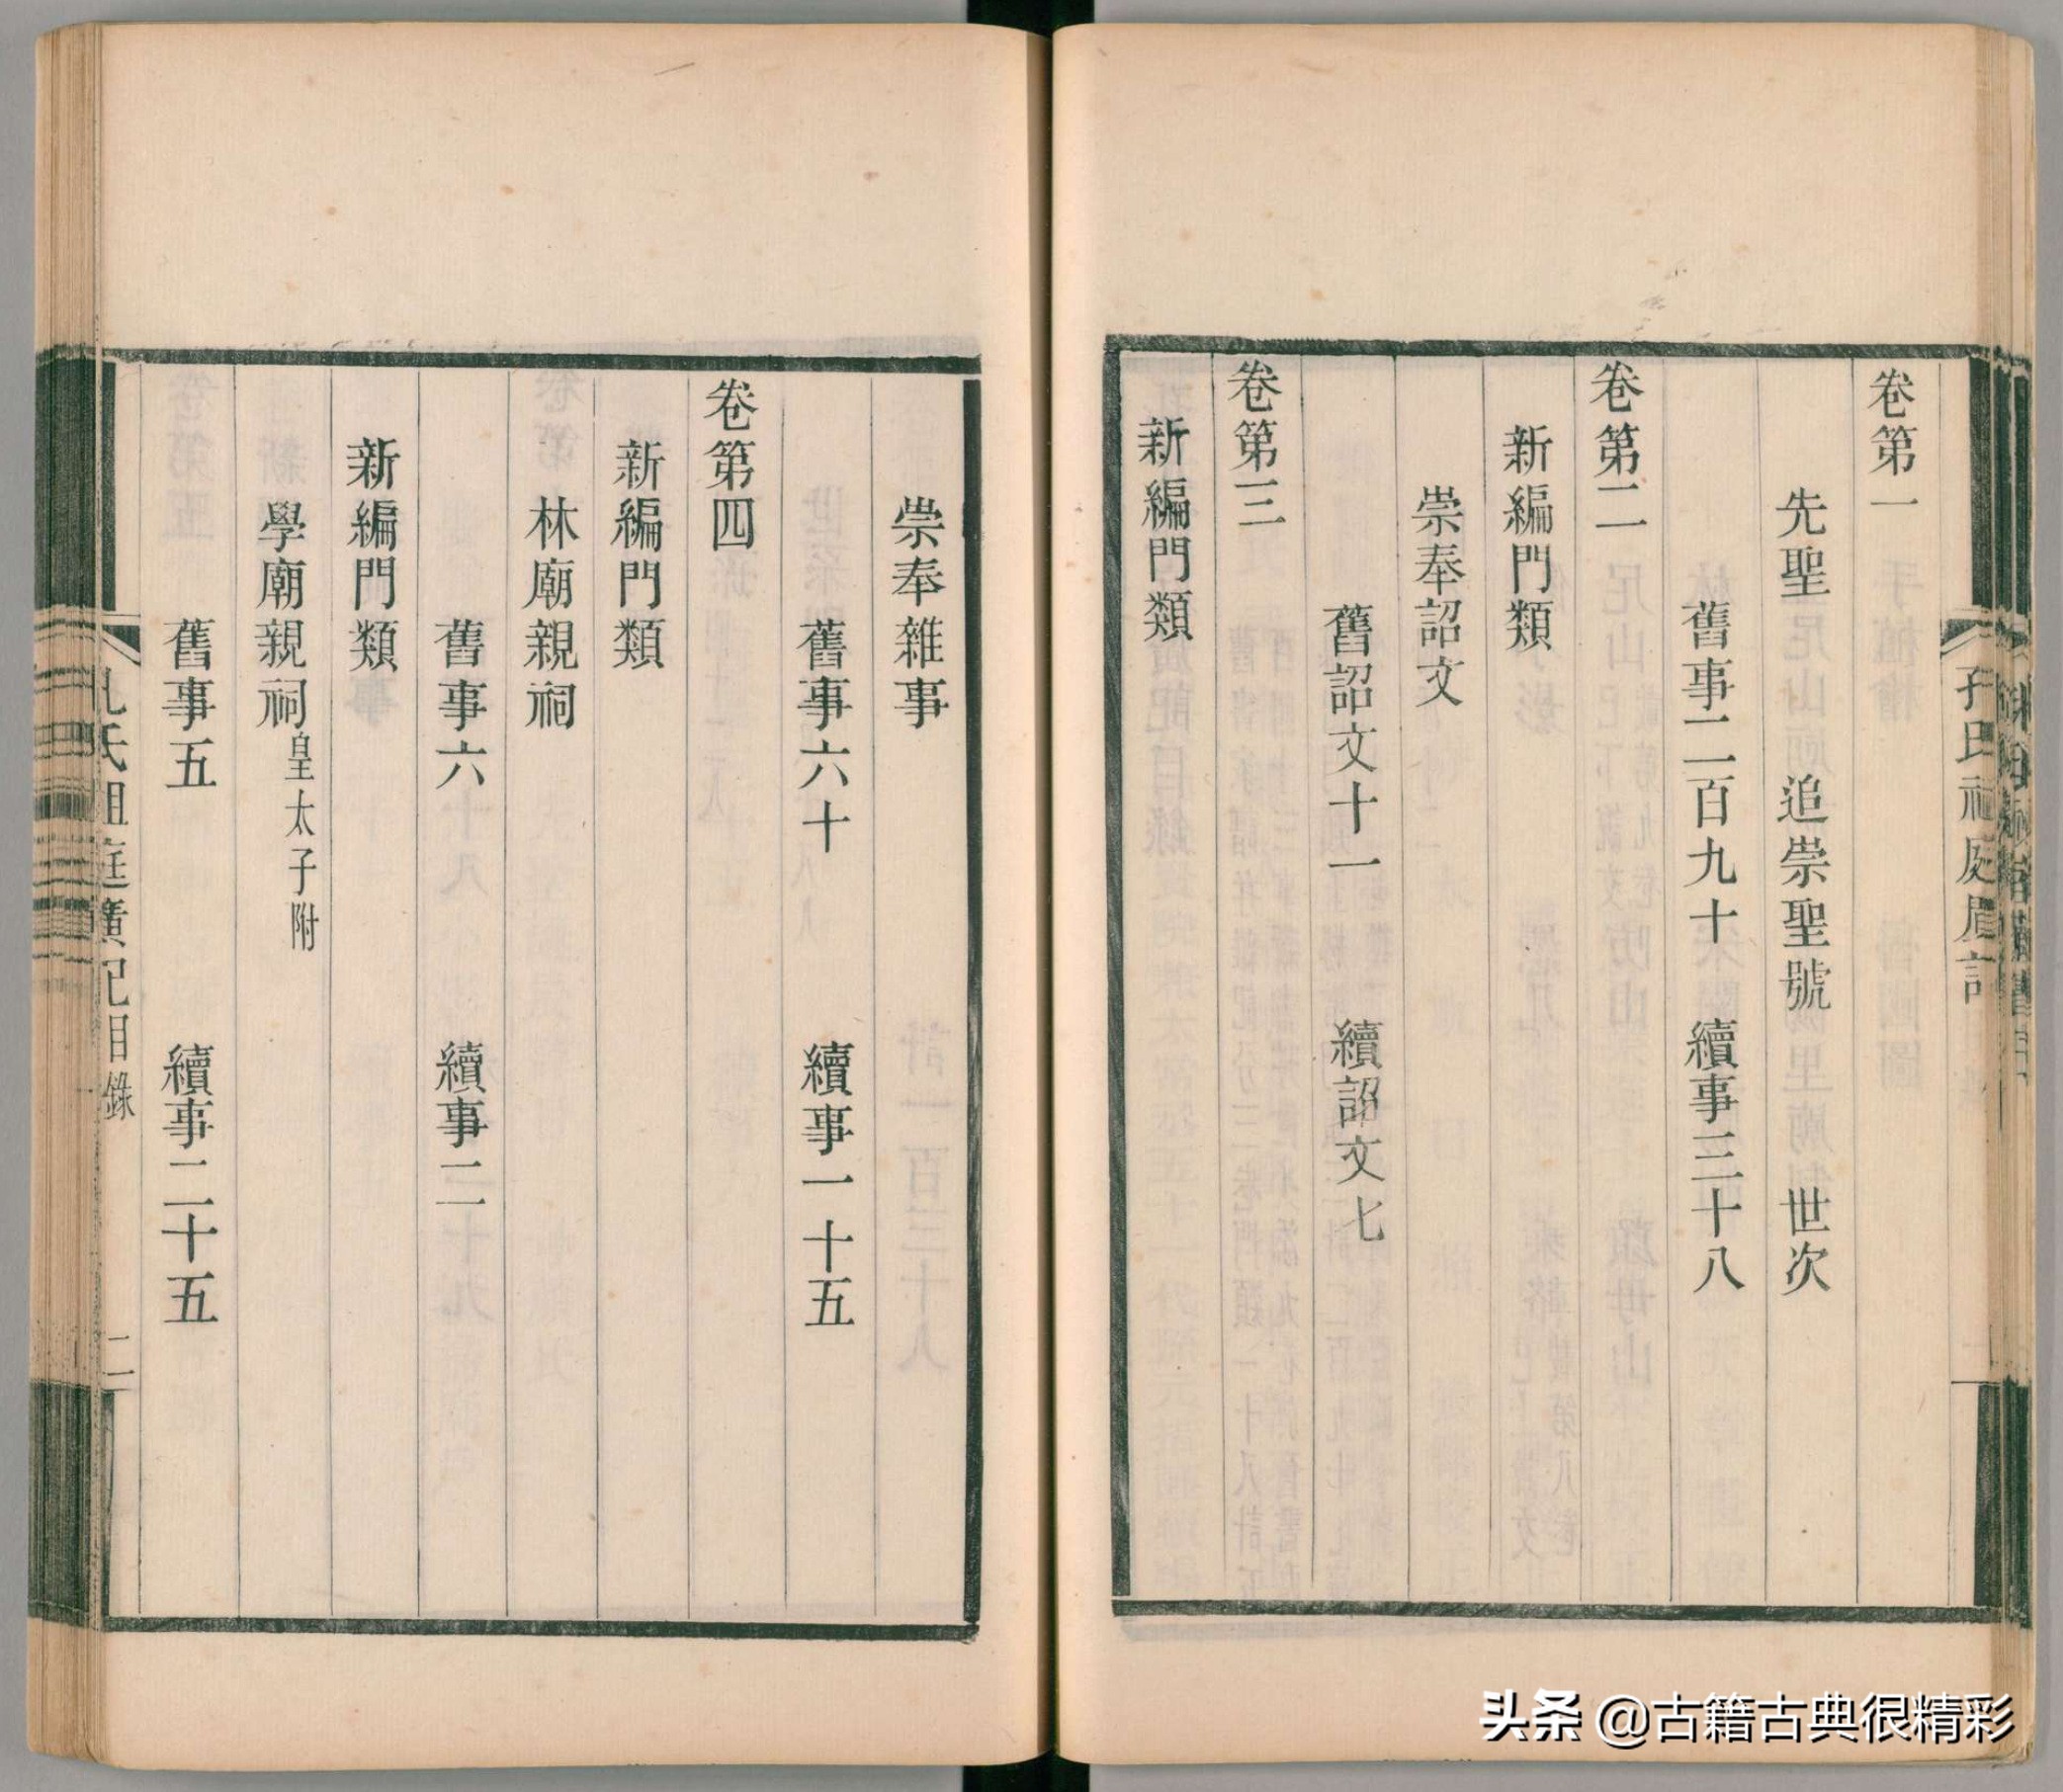 A Well Known Comprehensive Series Of Books In The Qing Dynasty 25 Linlang Secret Chamber Series Inews